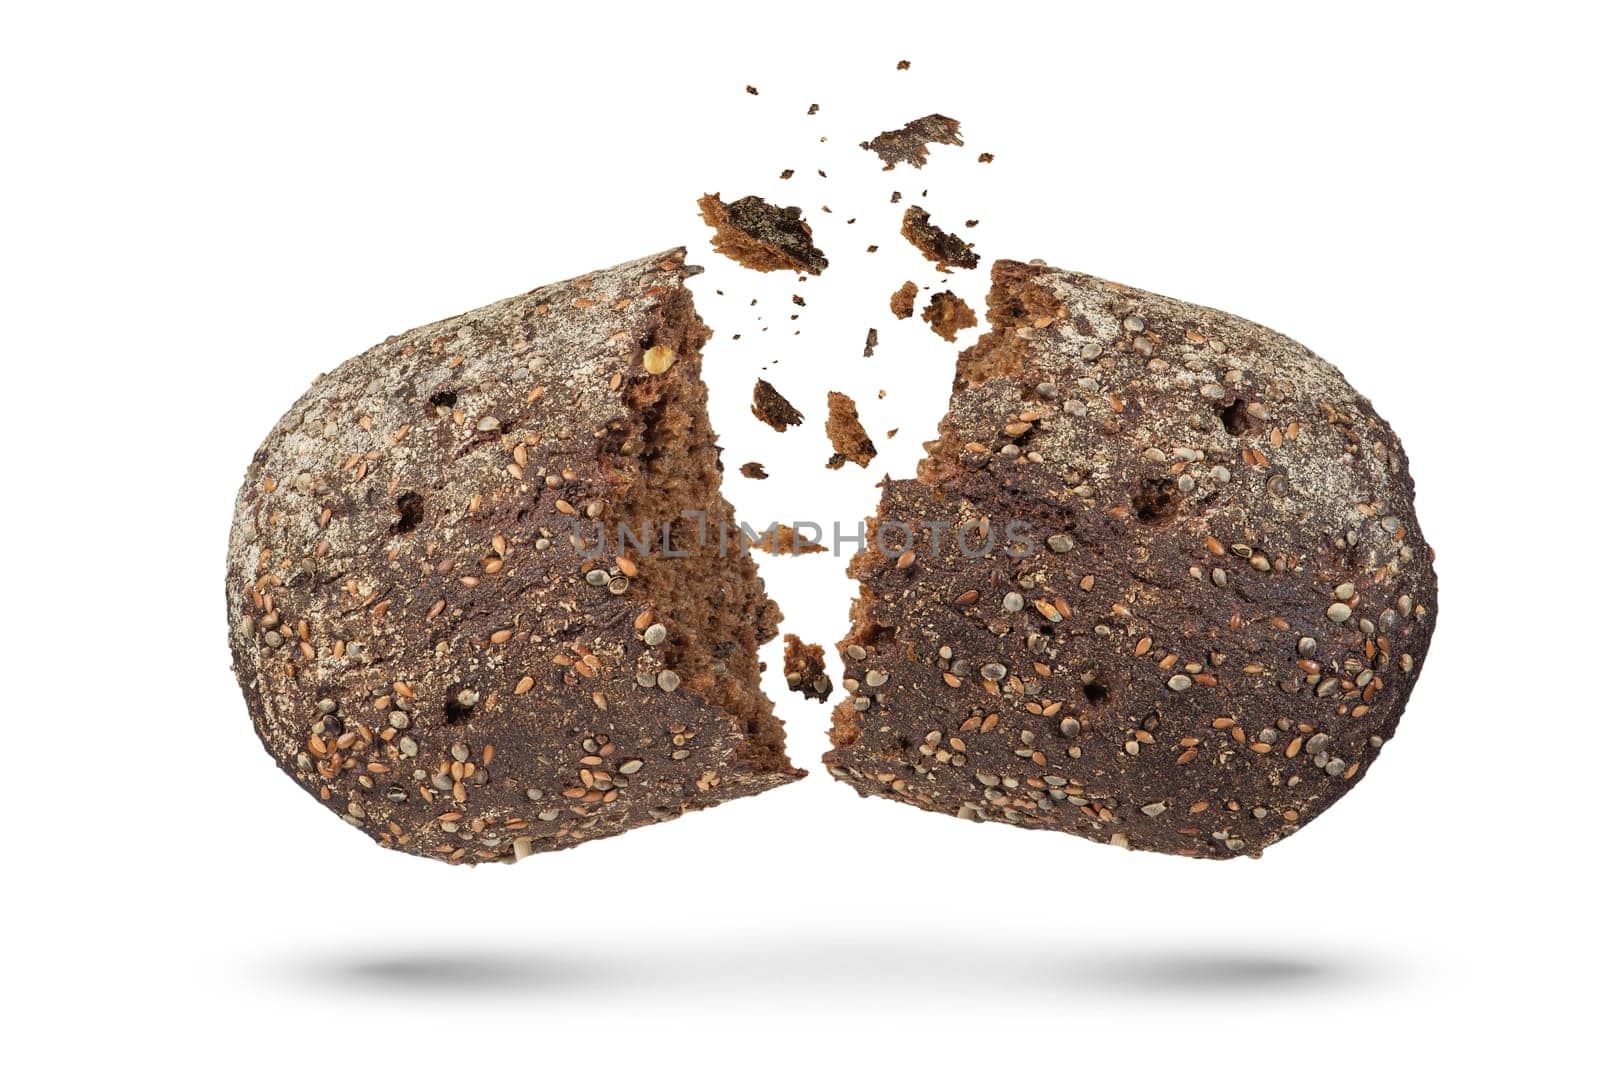 Loaf of black rye bread on a white isolated background. The bread breaks into 2 parts, crumbs fall out of it. view from above